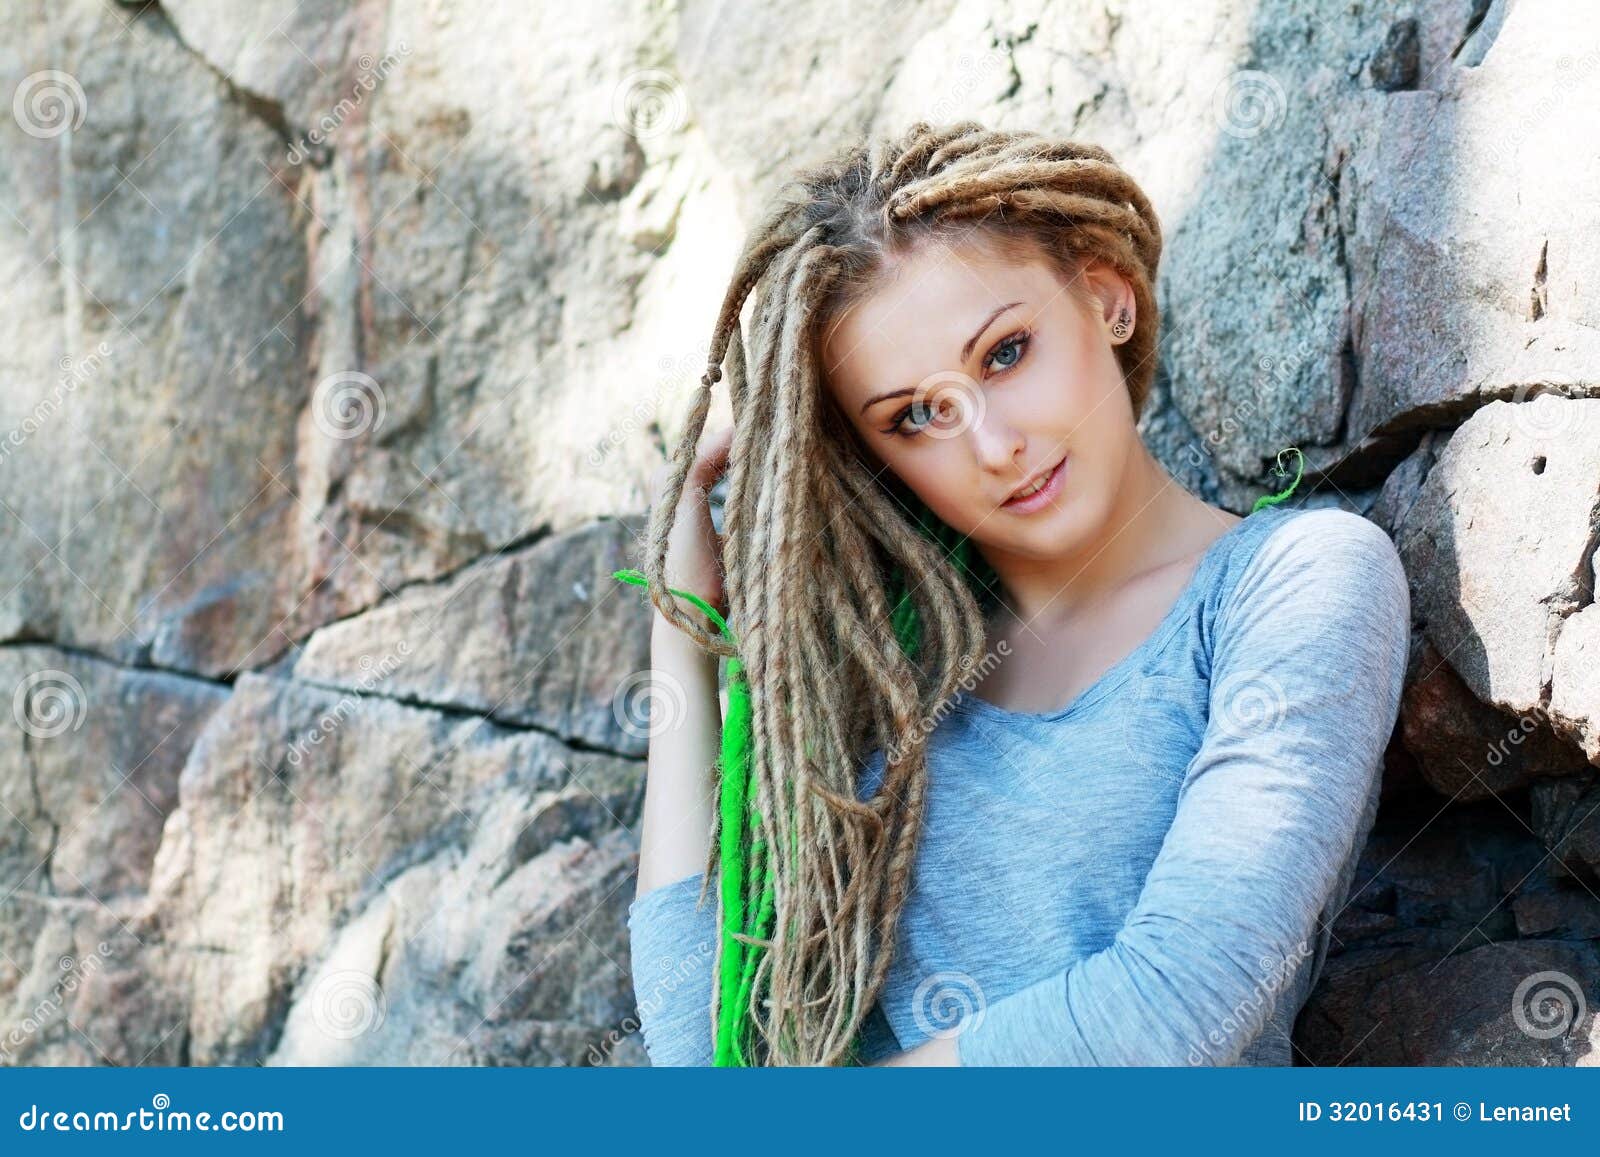 Fashion Hairstyle with Dreads Stock Image - Image of adolescent, elegance:  32016431